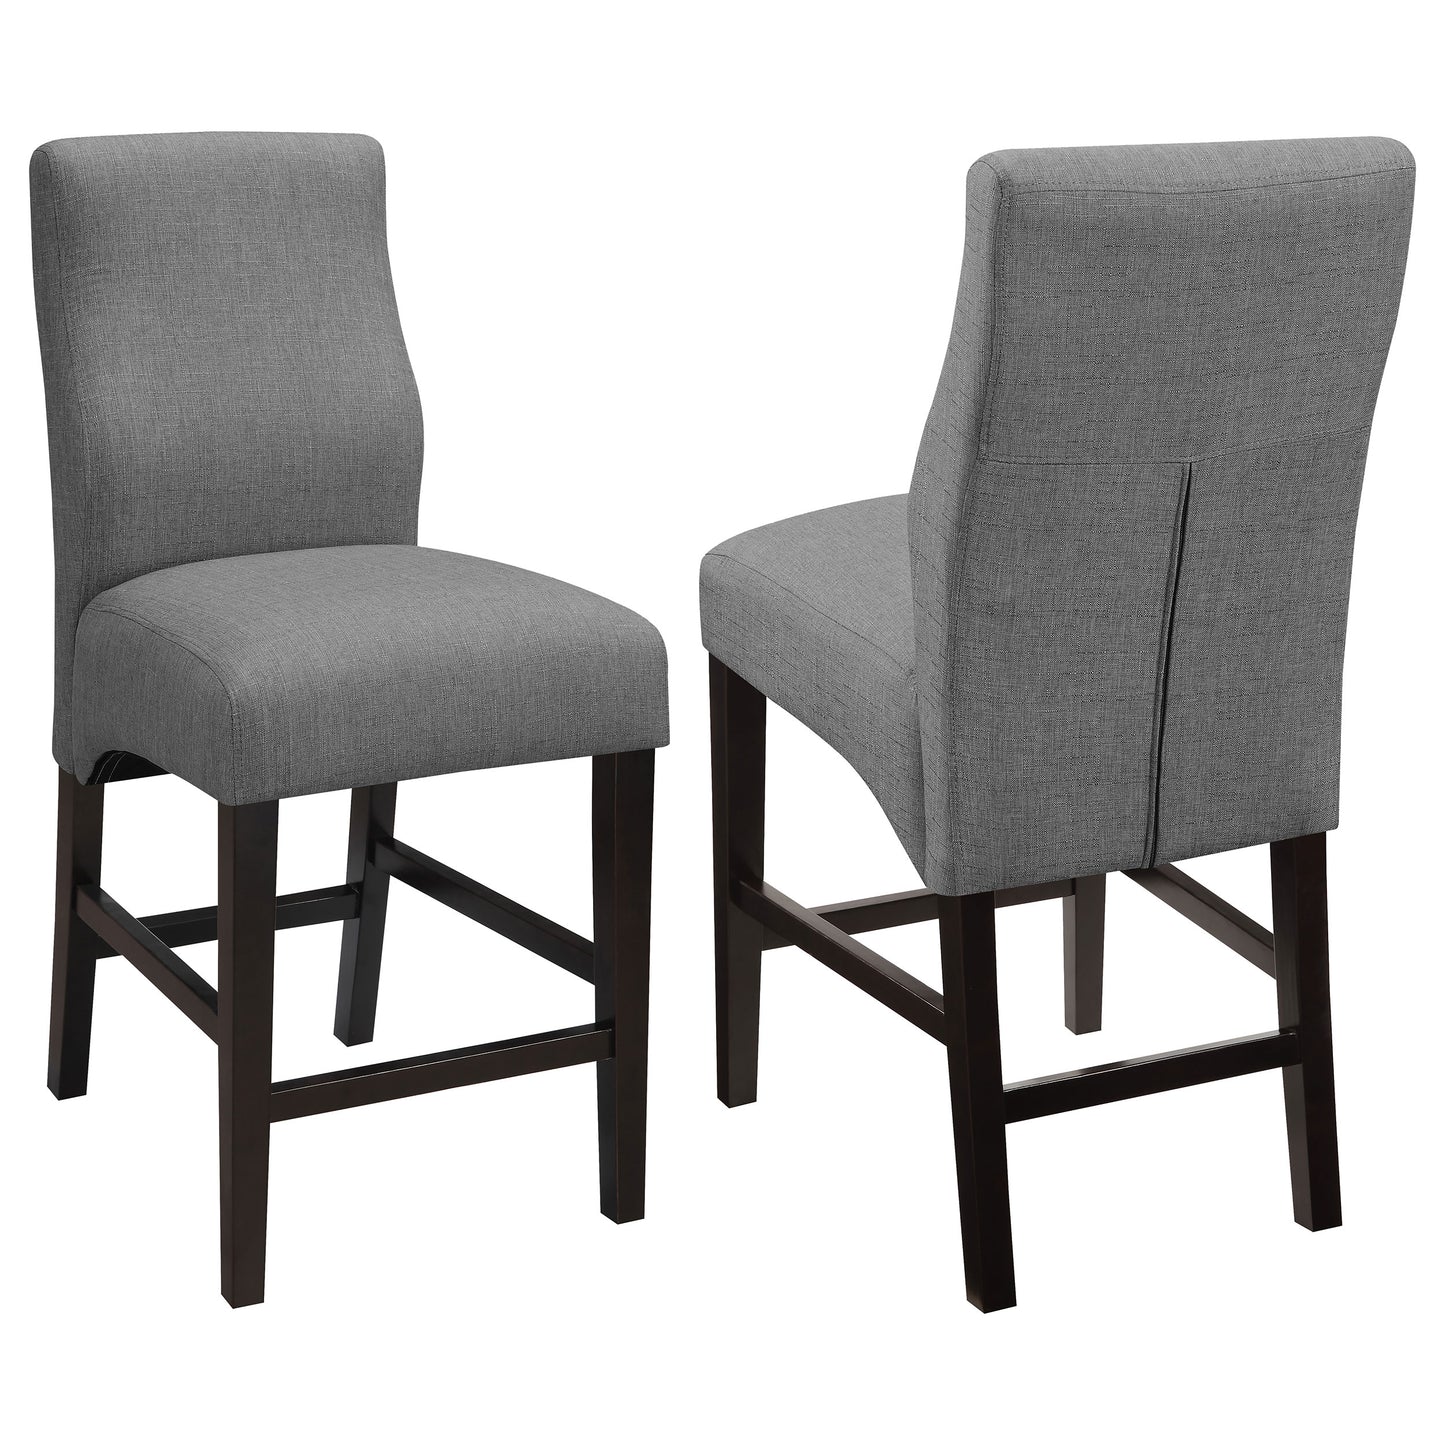 Mulberry Upholstered Counter Height Stools Grey and Cappuccino (Set of 2)